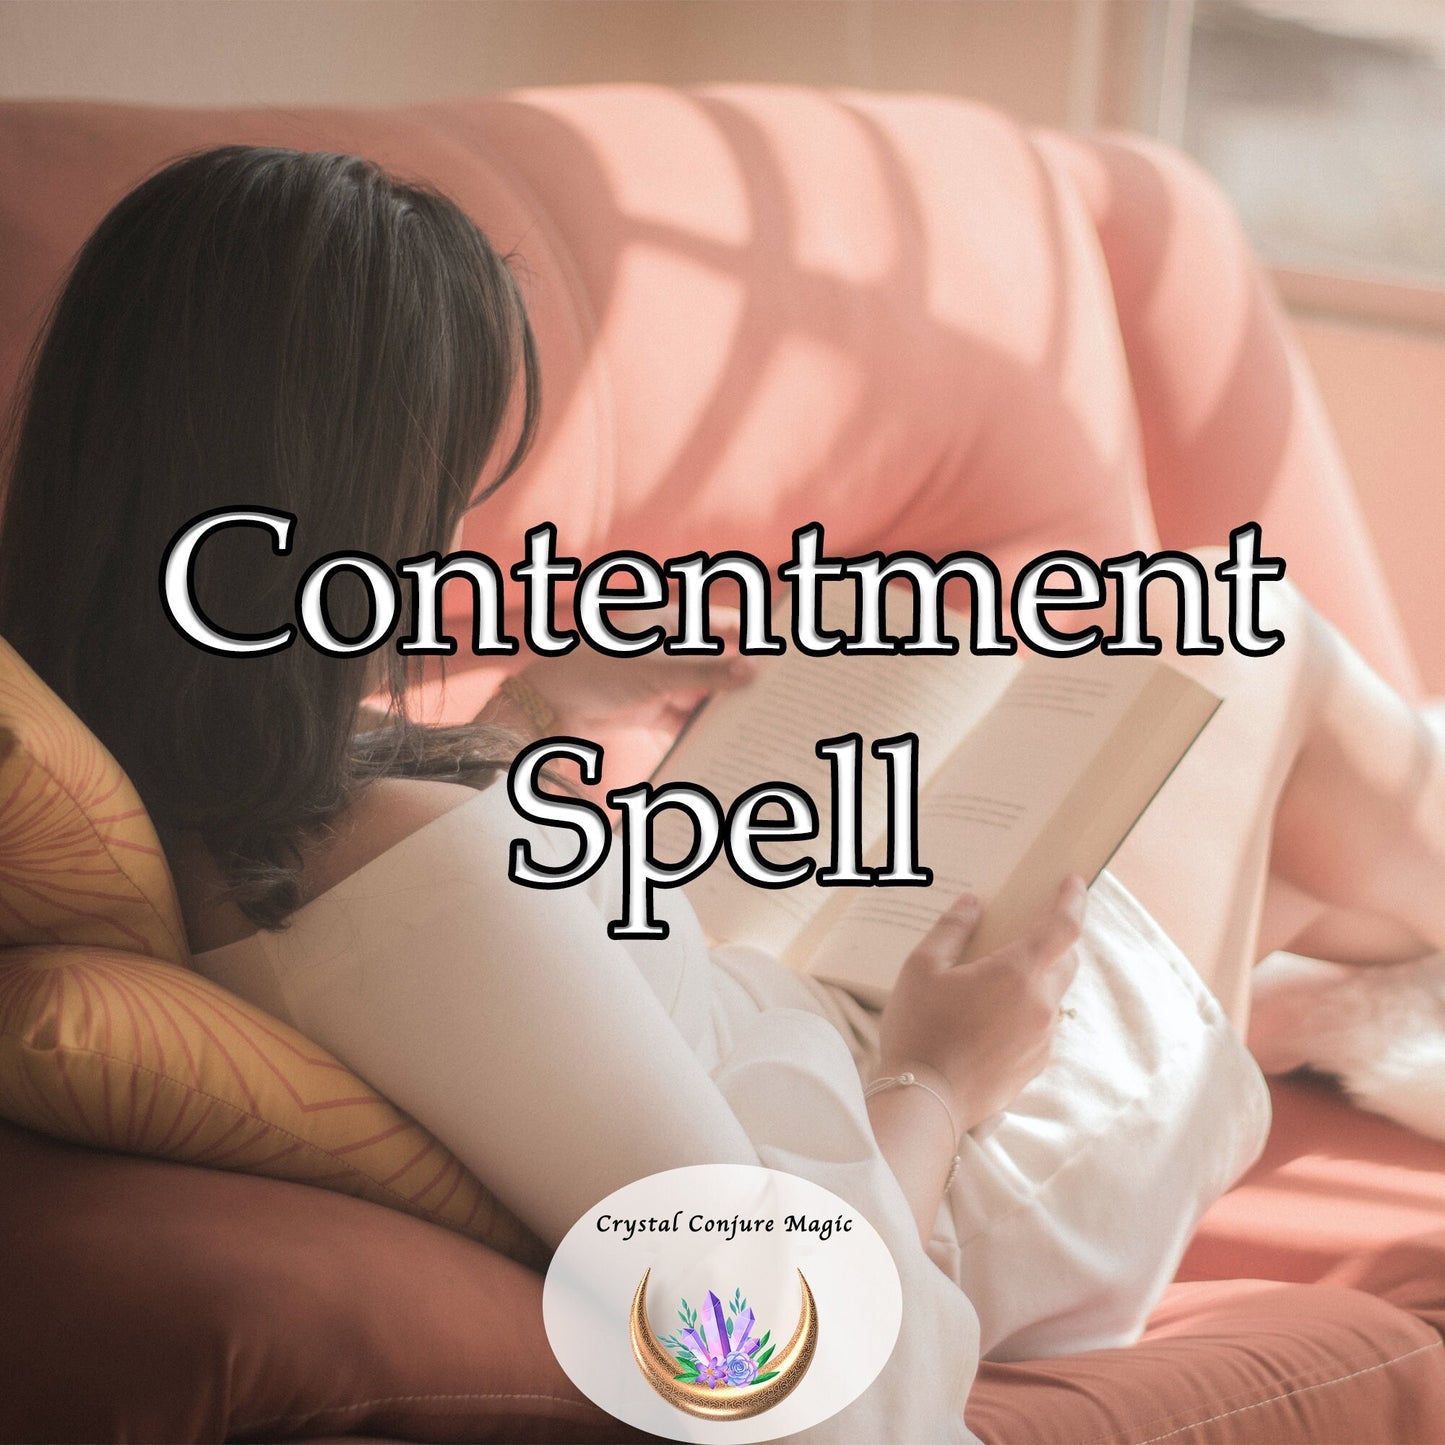 Contentment Spell - root out discontent buried deep within your soul, open gateways to uncharted realms of peace and satisfaction